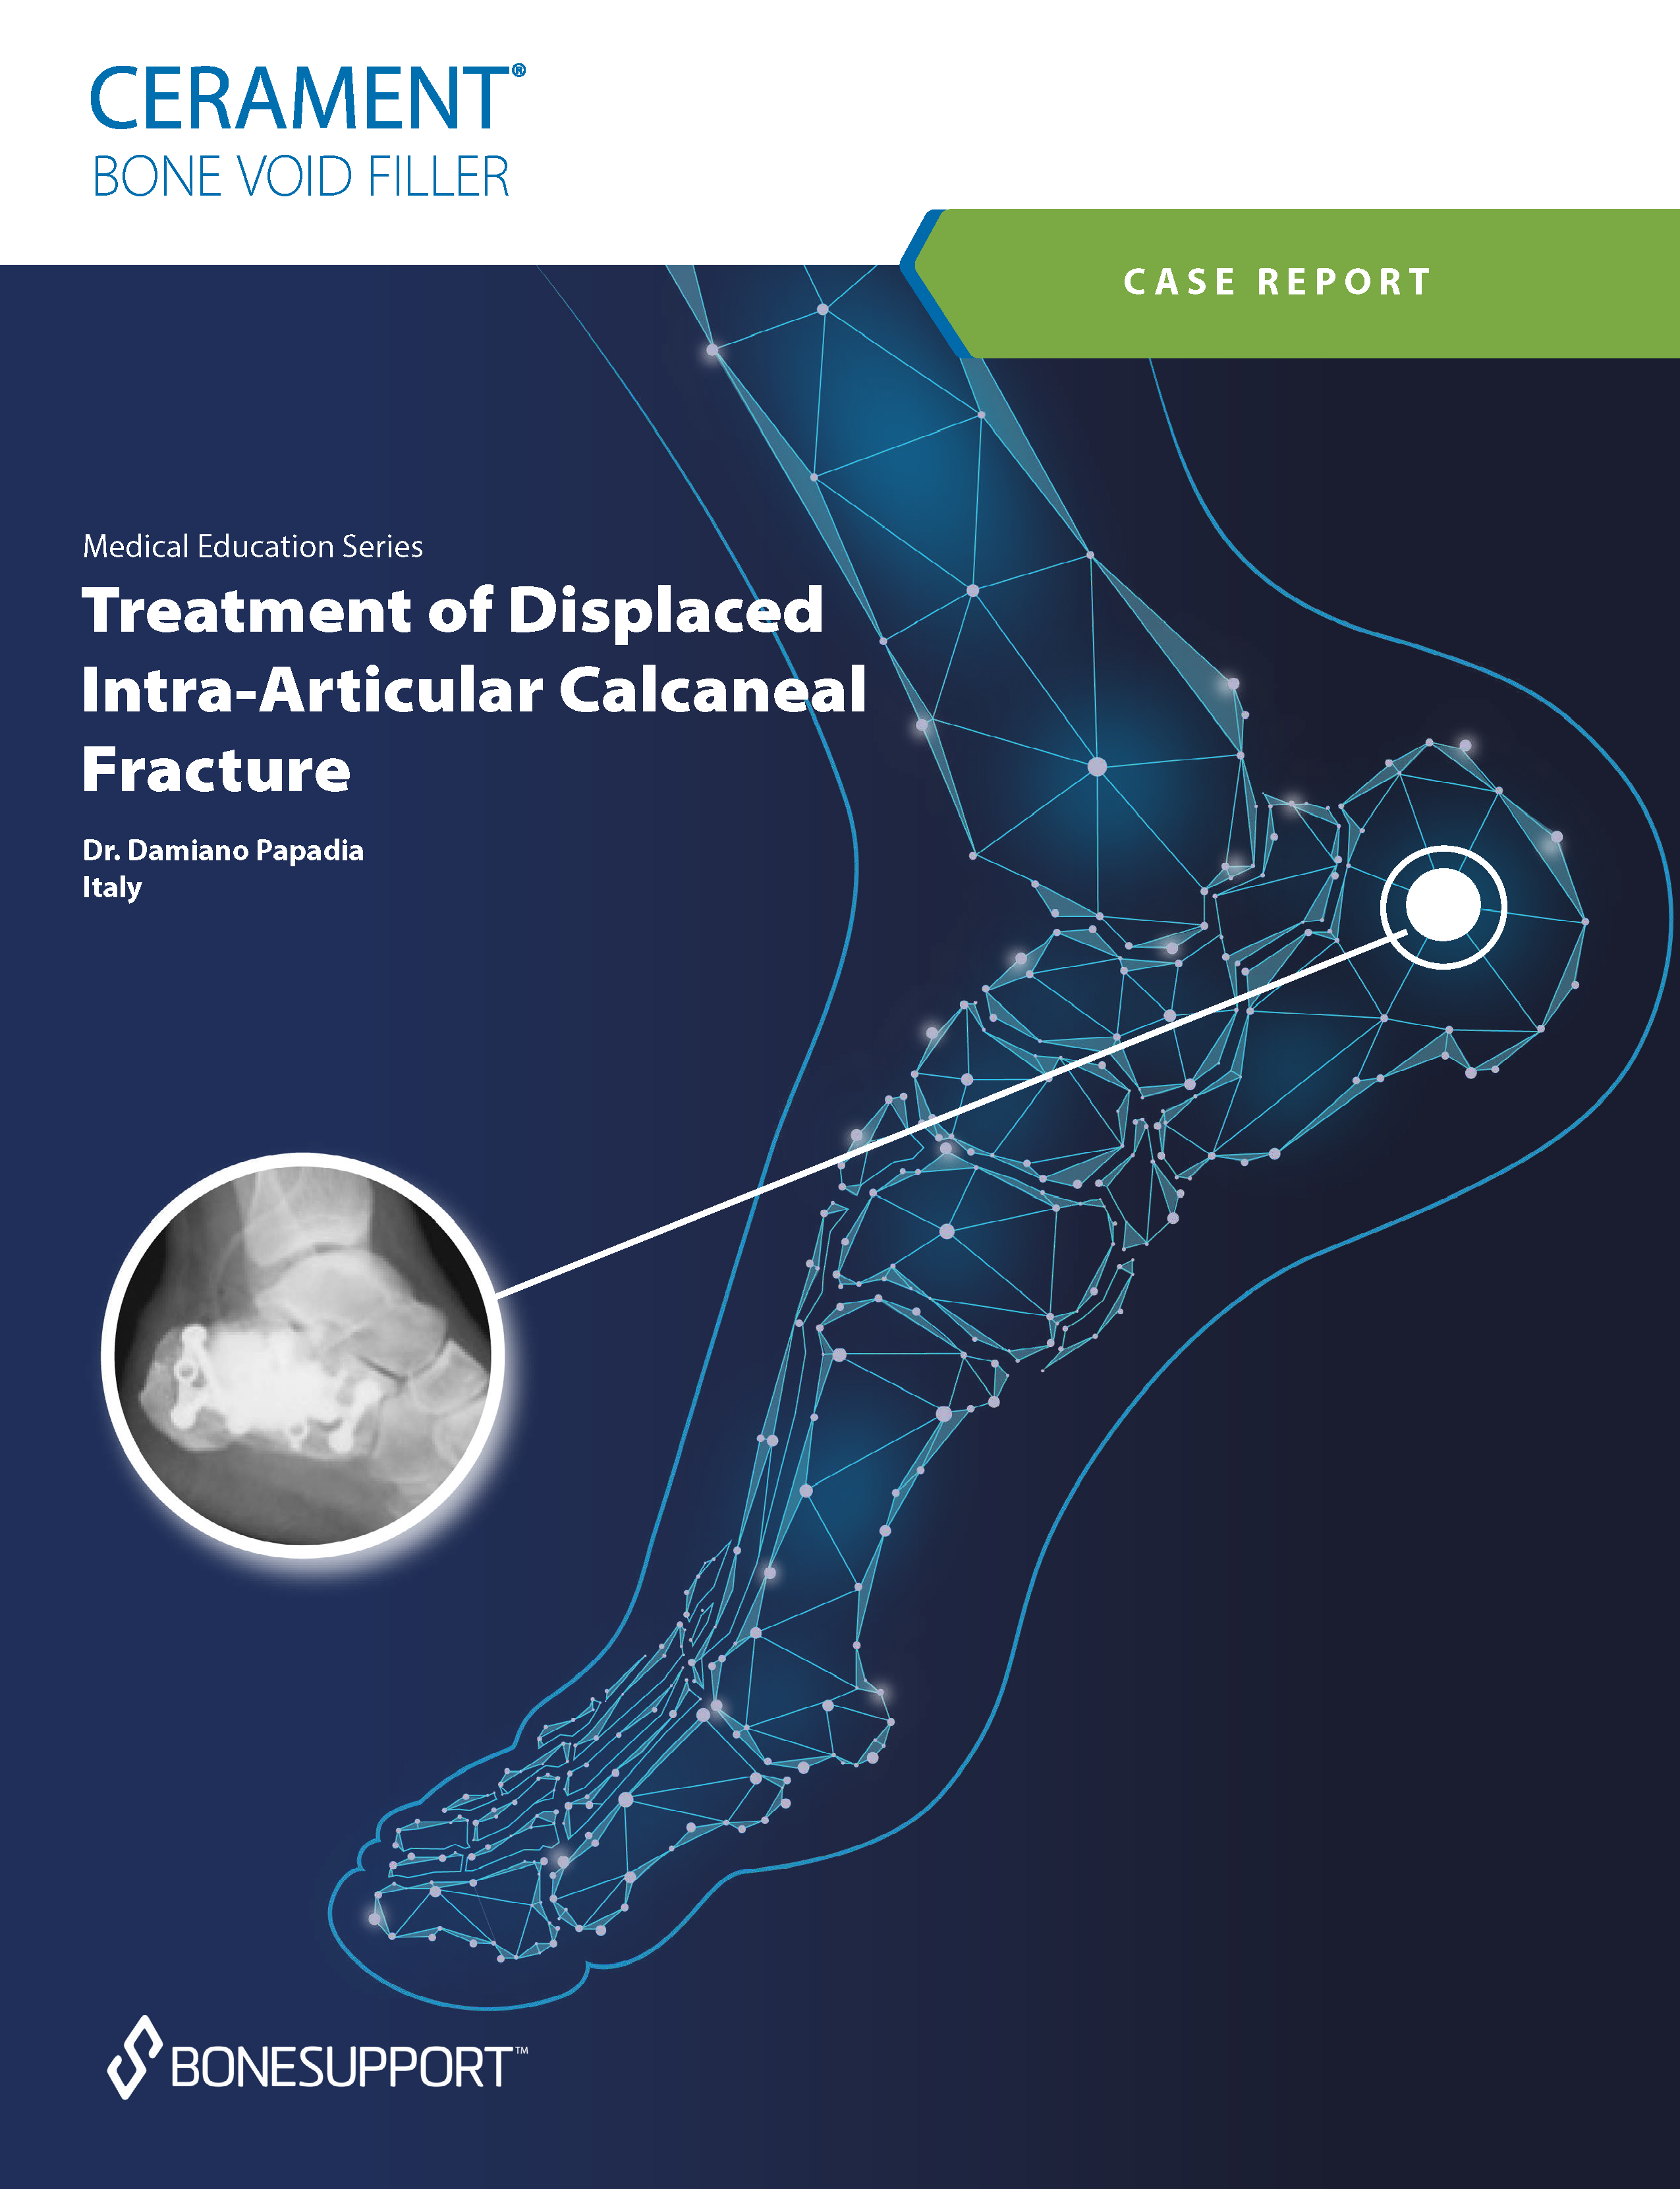 Treatment of Displaced Intra-Articular Calcaneal Fracture